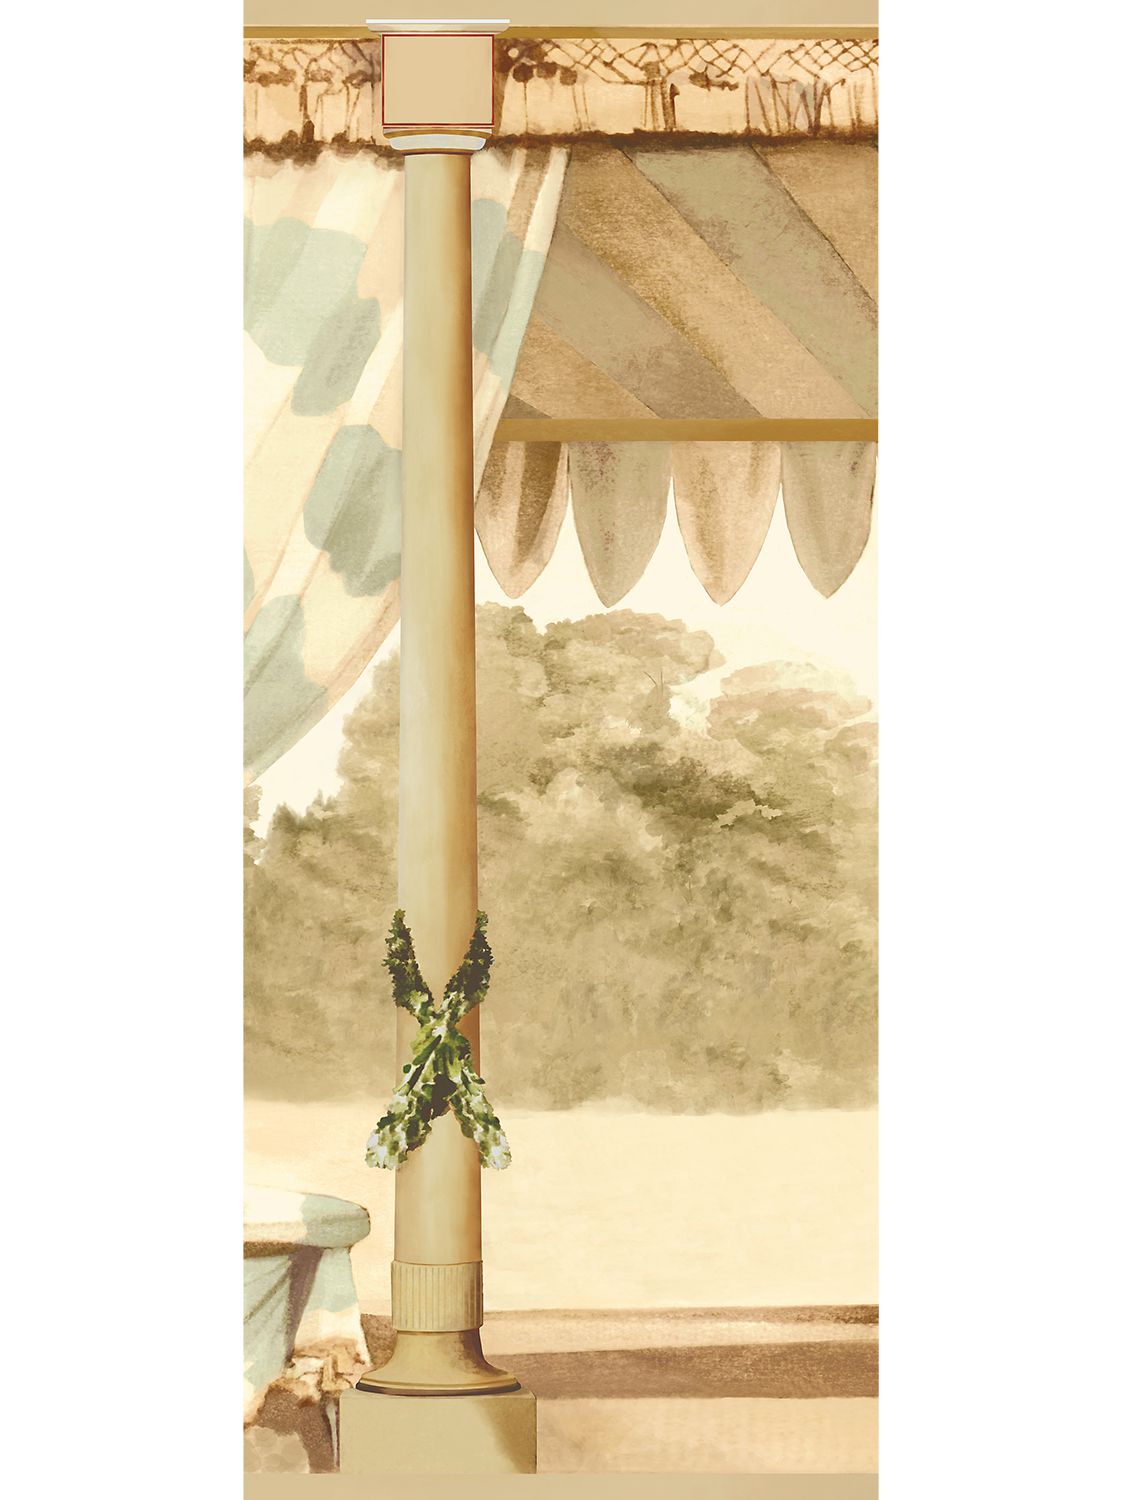  Arjumand's World In The Tent Pale Green 3 Wallpaper 